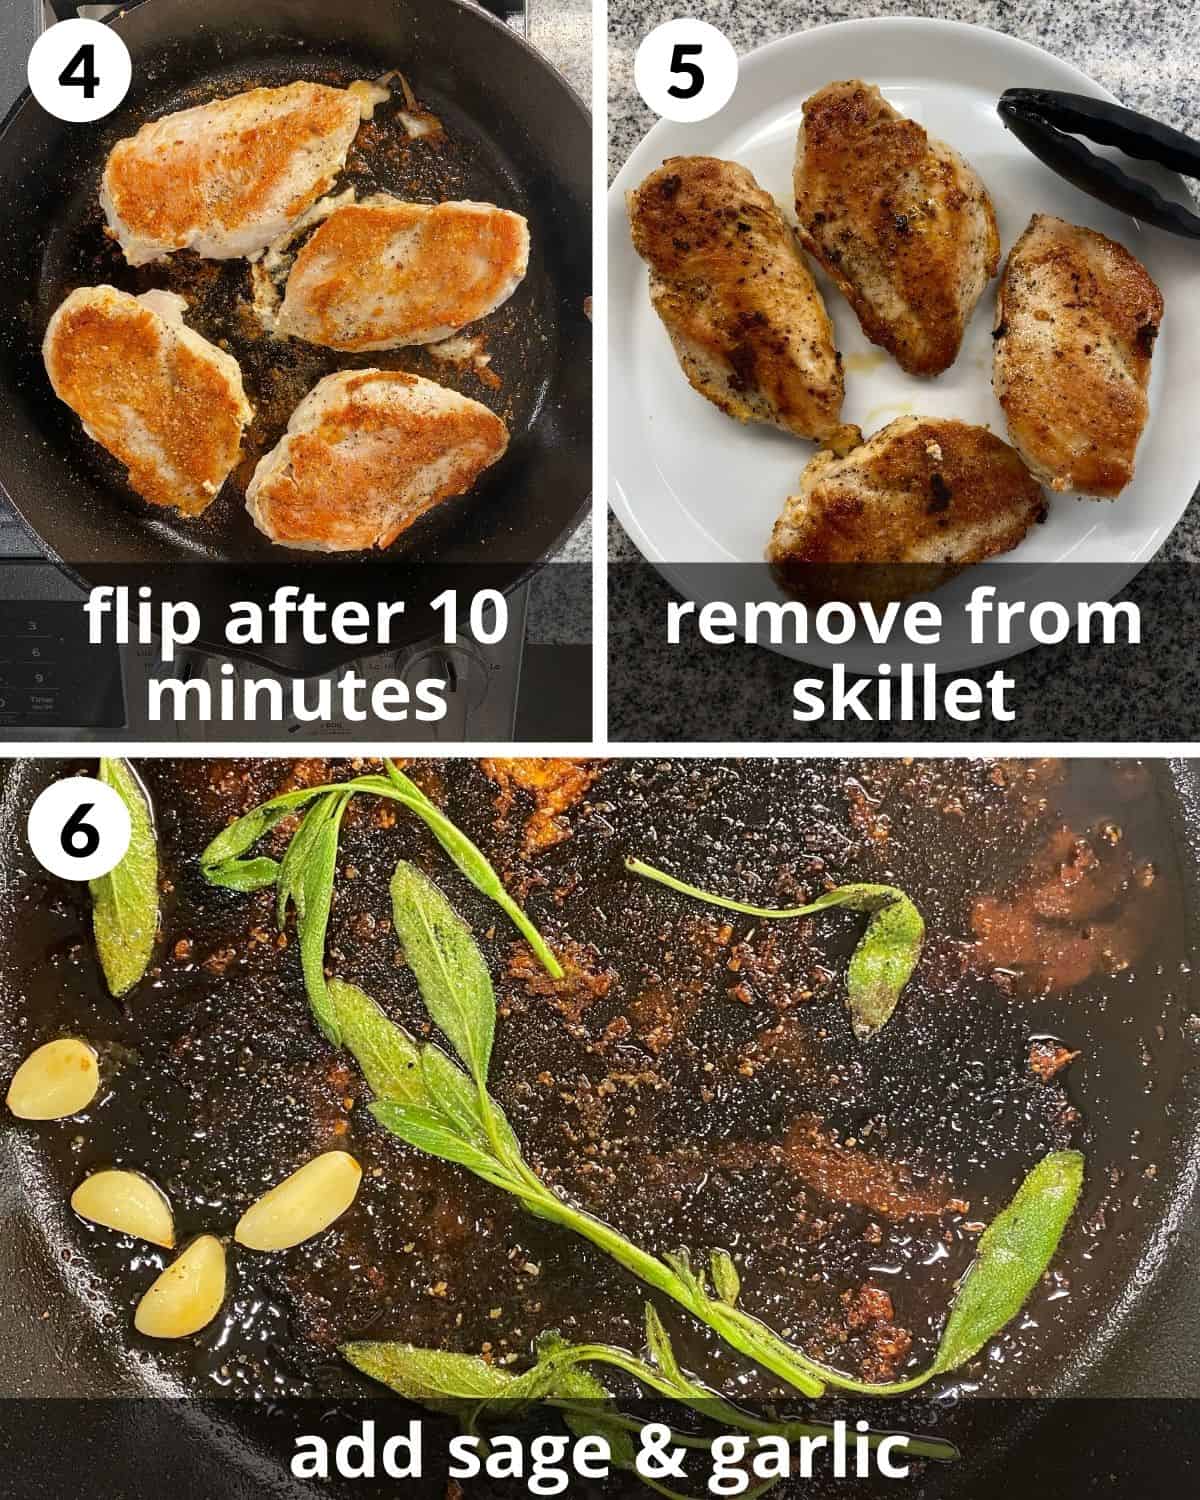 3 photos to show steps 4-6. Chicken flipped. Chicken resting. Garlic and sage frying.